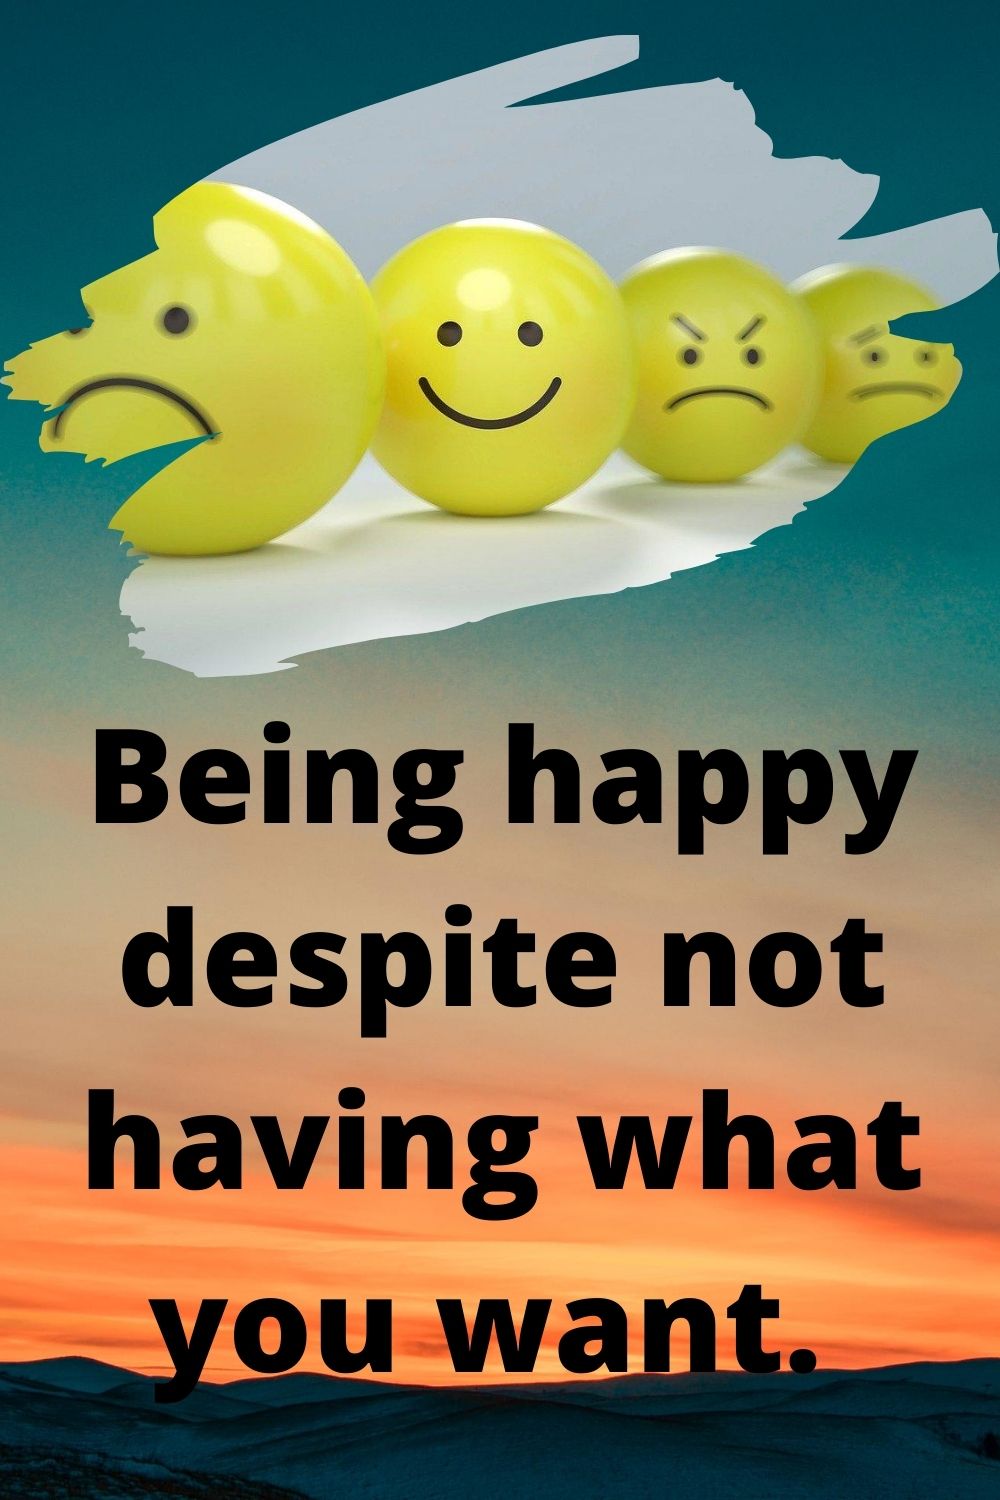 Being happy despite not having what you want.